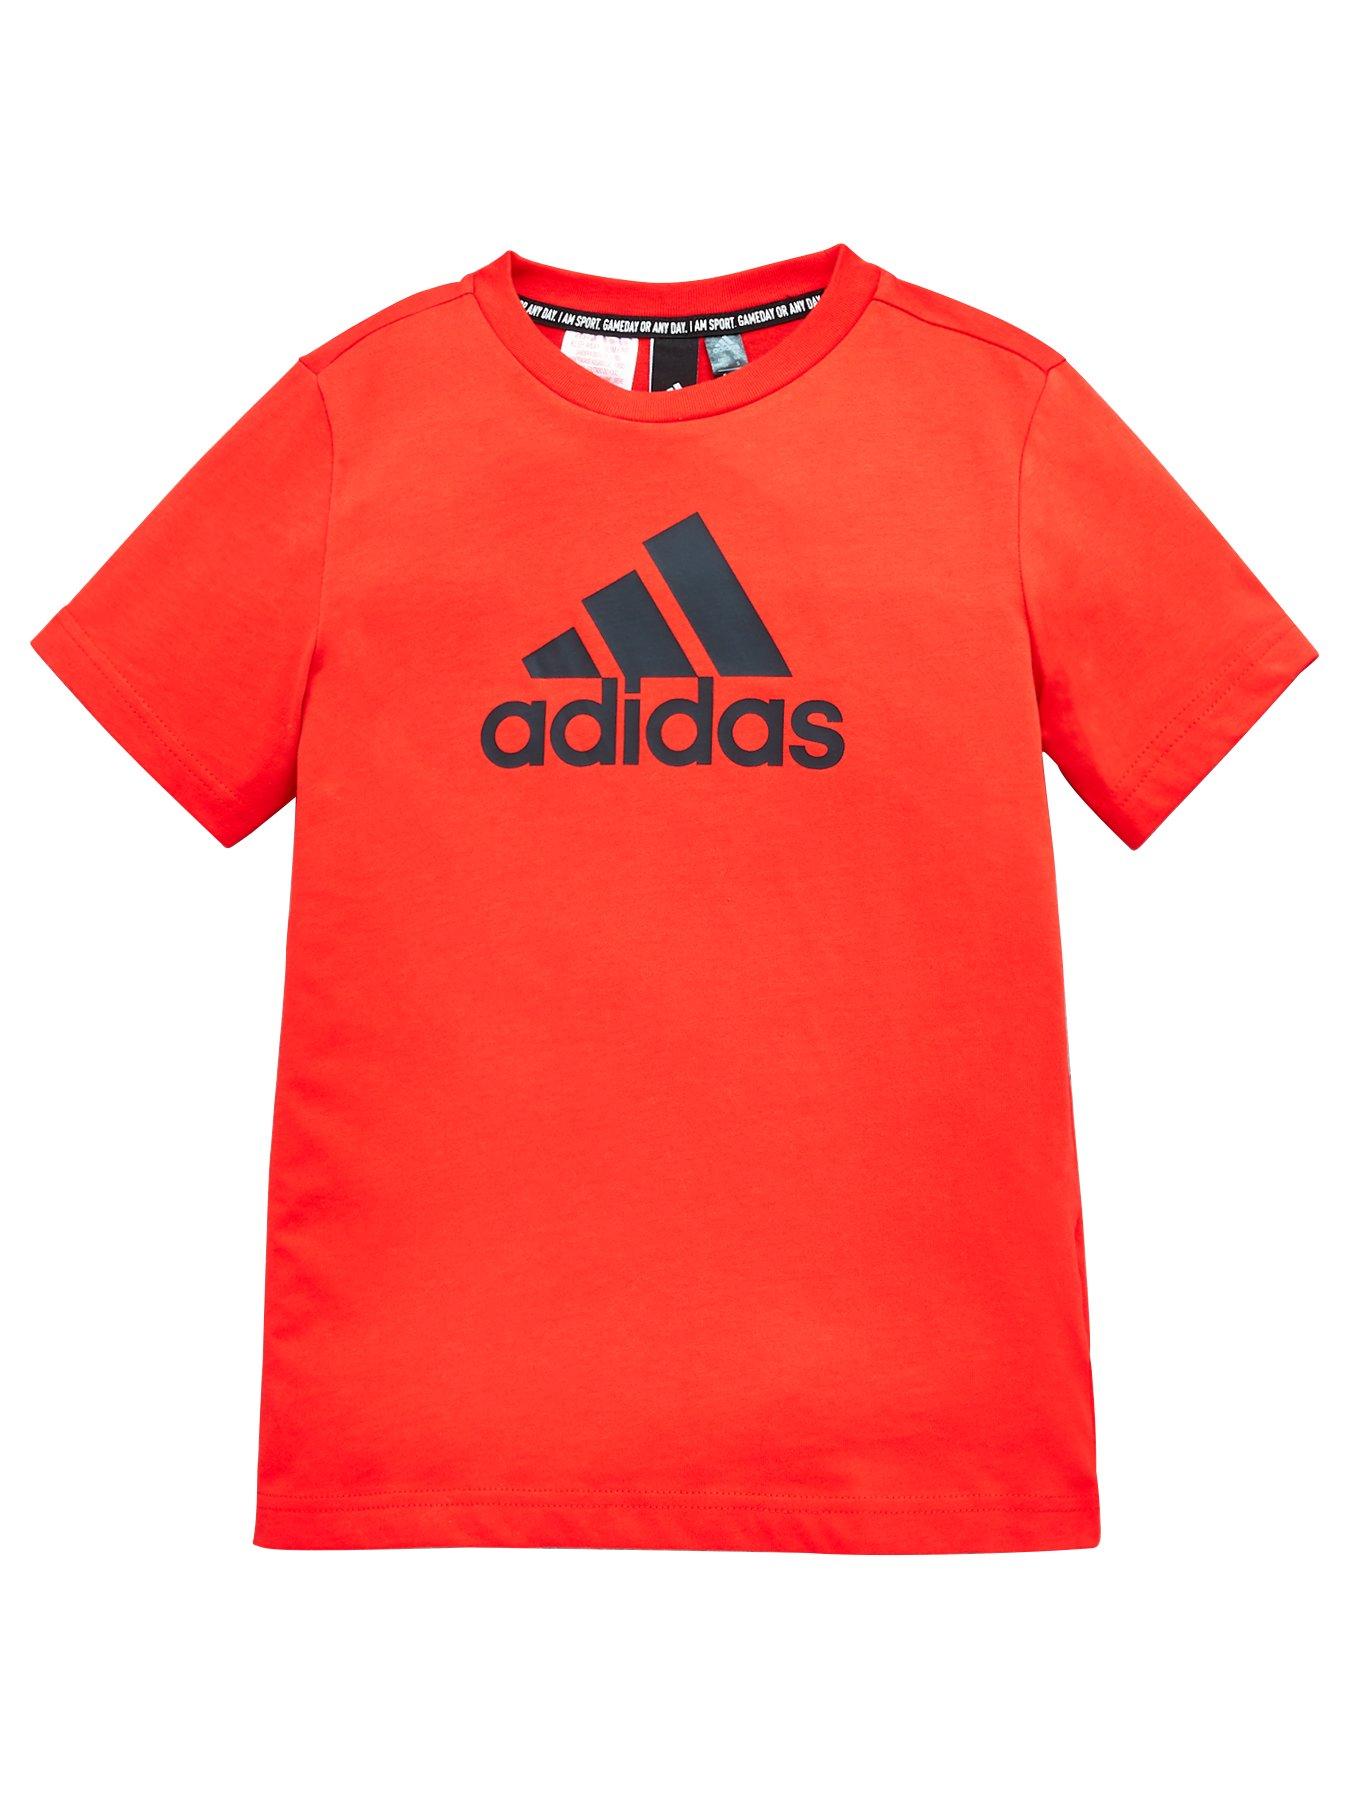 adidas Youth Boys Must Haves Badge Of Sport T-Shirt - Red/Black | very ...